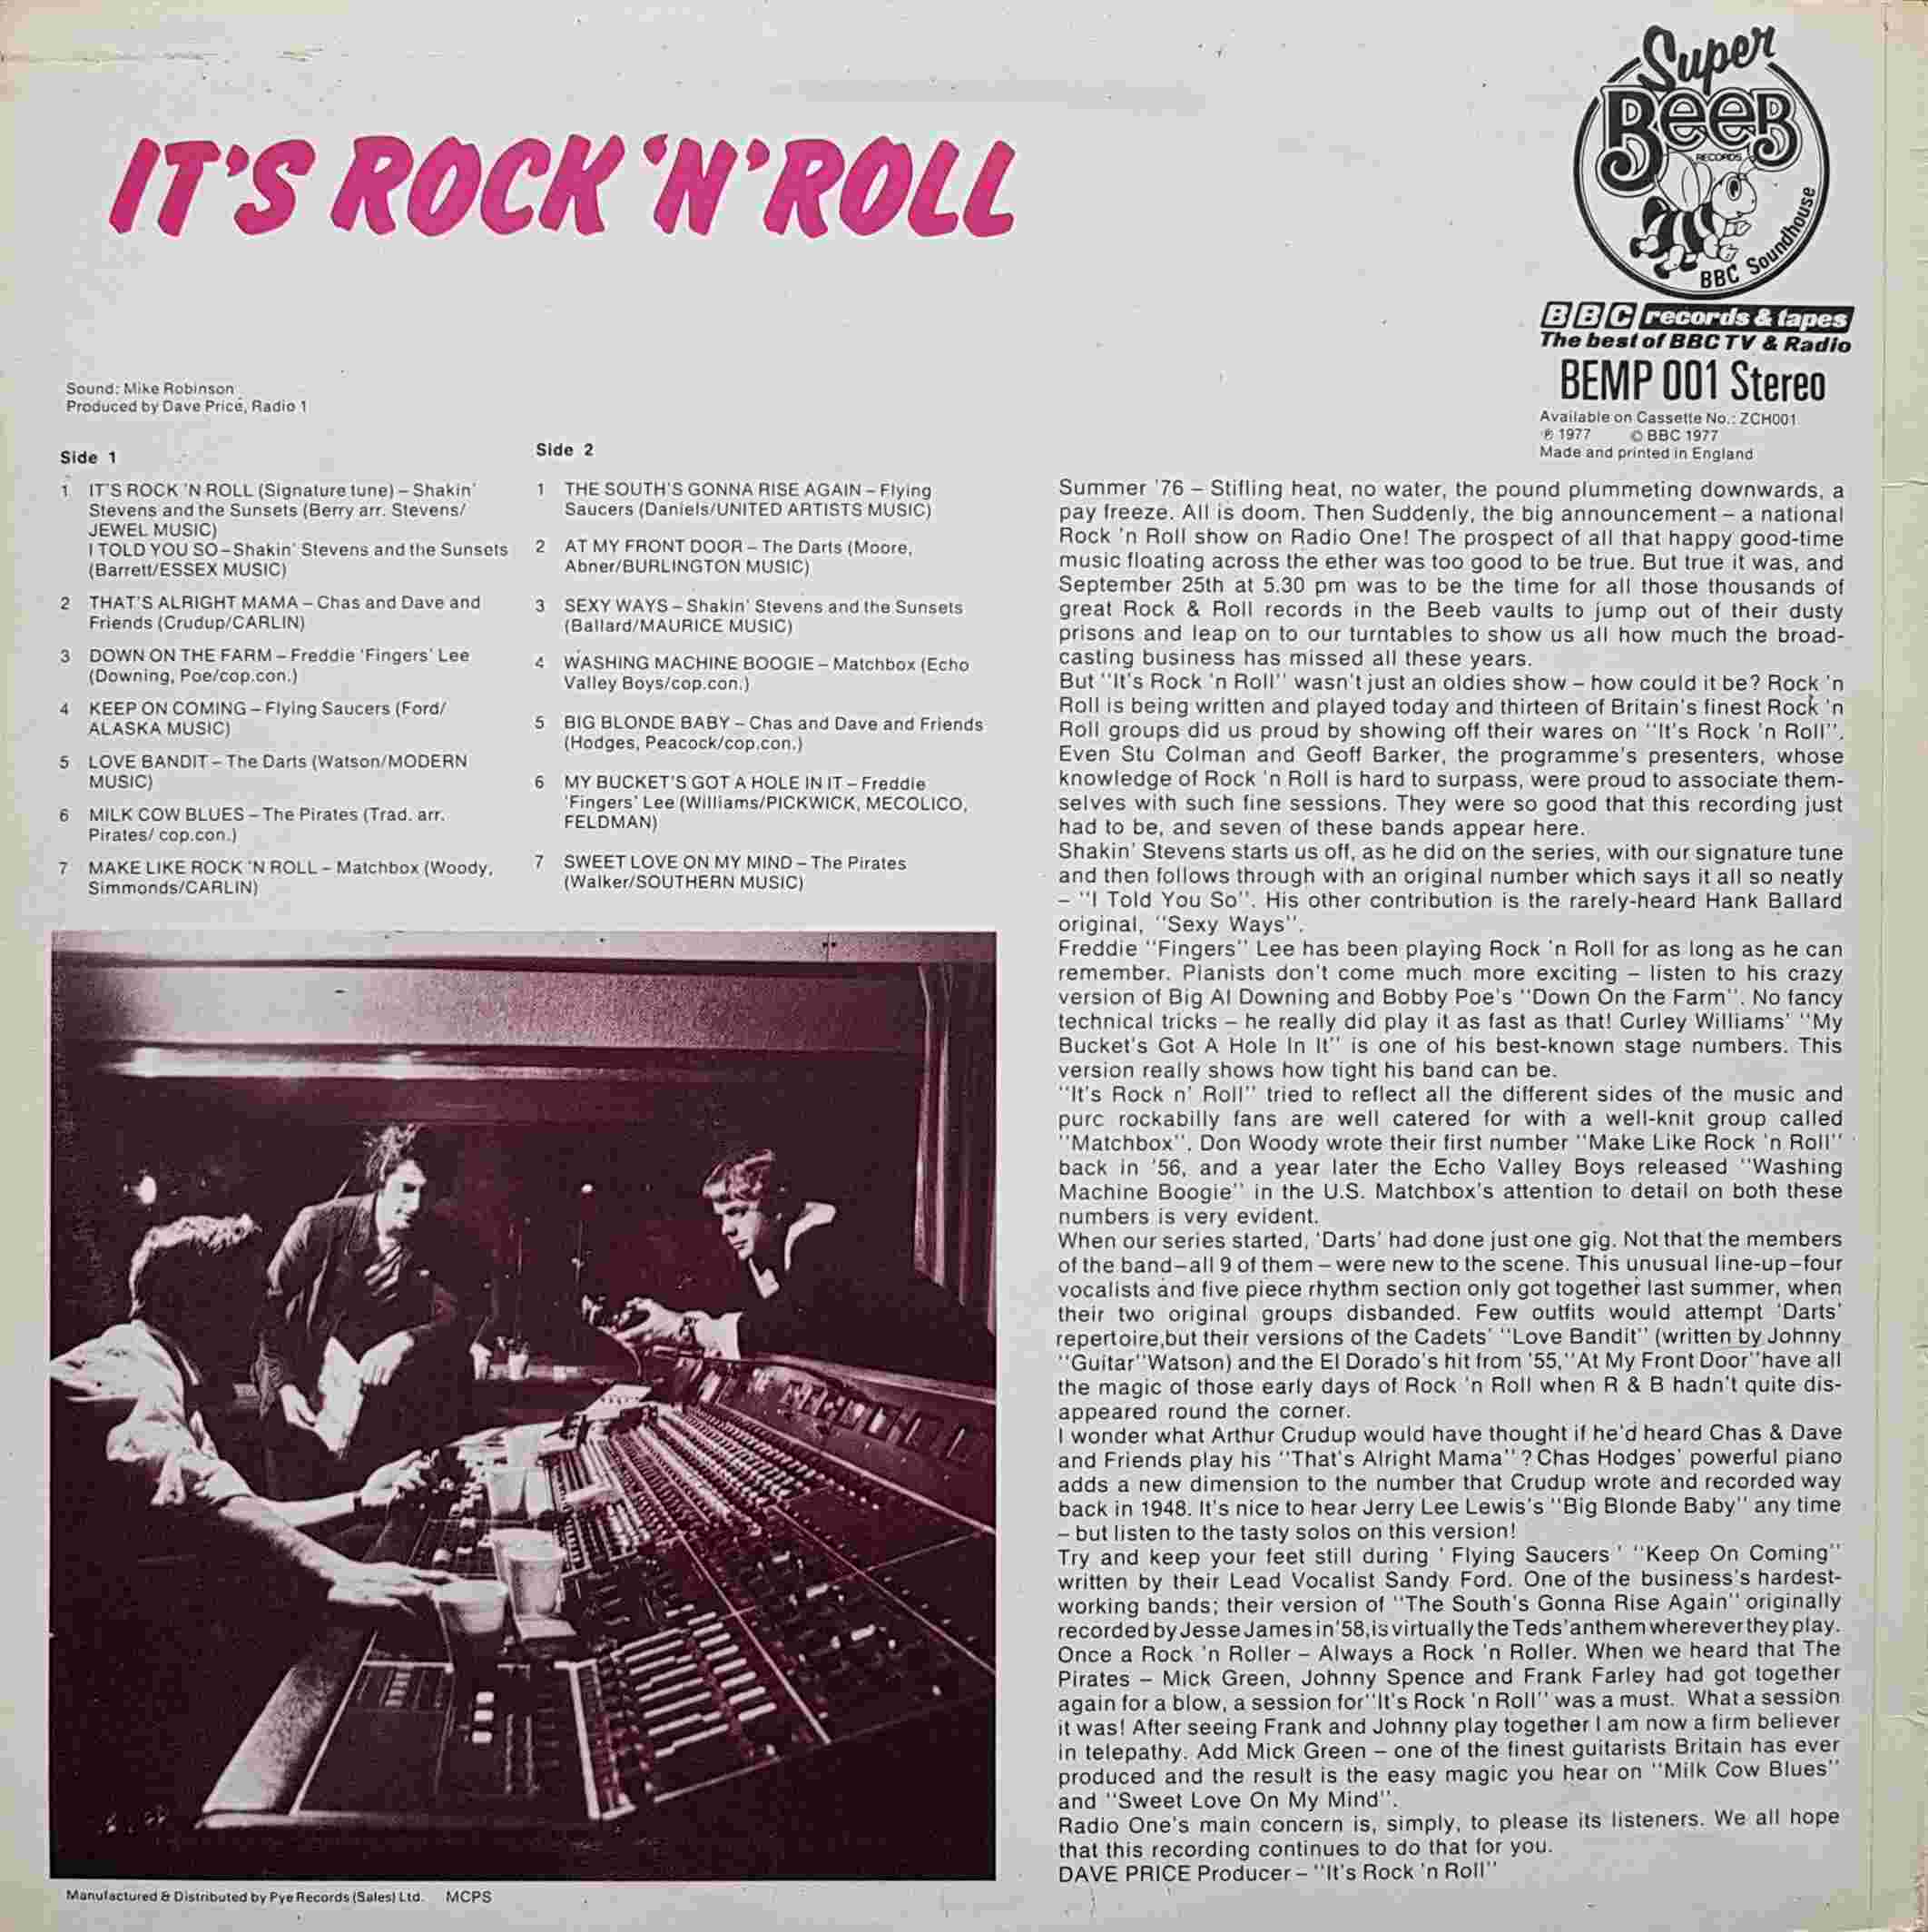 Picture of BEMP 001 It's rock 'n' roll by artist Various from the BBC records and Tapes library